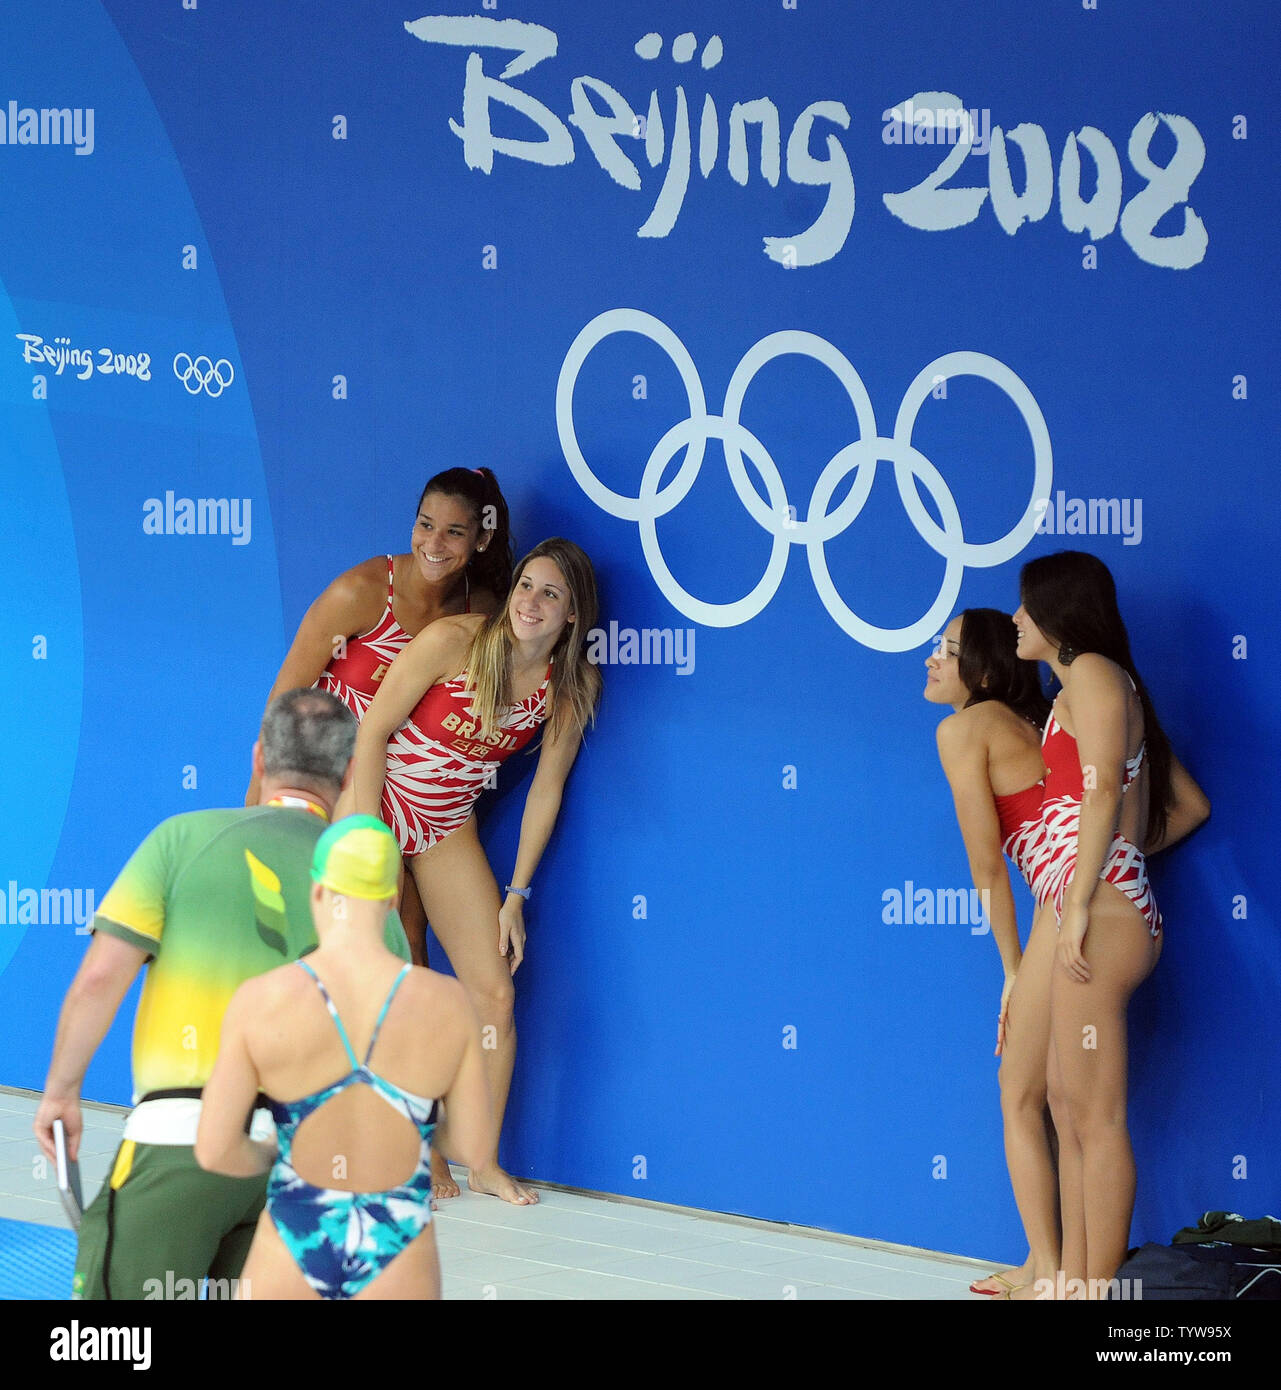 Members of the Brazilian swim team pose for a photo under an Olympic logo before they practice at the National Aquatic Center, known as the Water Cube, in Beijing, China, on August 5, 2008. The 2008 Summer Olympics Opening Ceremony will be on August 8.      (UPI Photo/Roger L. Wollenberg) Stock Photo